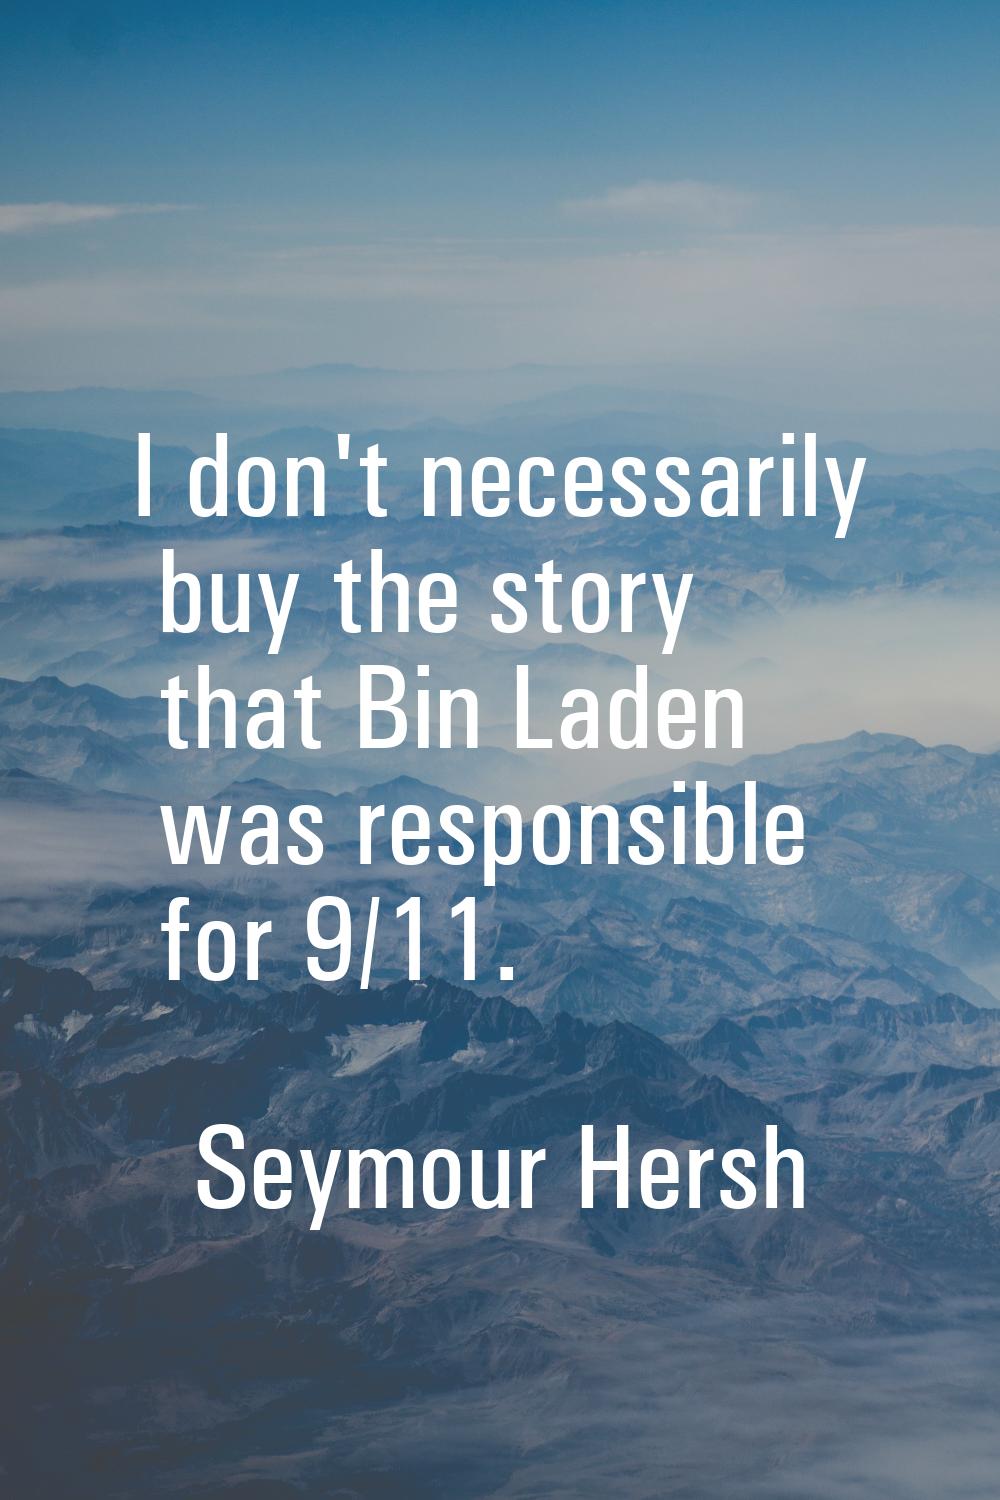 I don't necessarily buy the story that Bin Laden was responsible for 9/11.